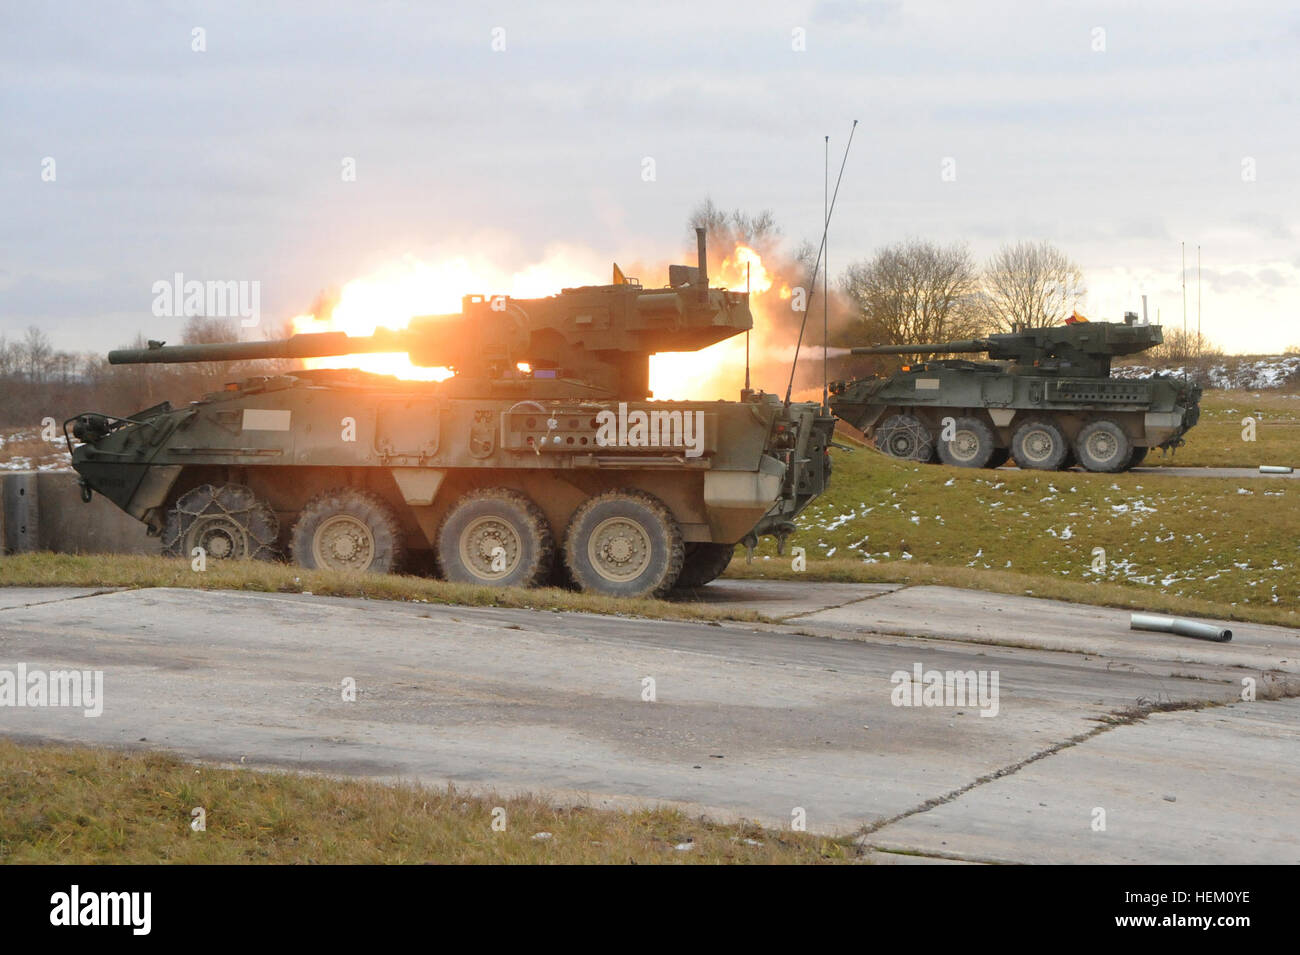 A U.S. Army Stryker Mobile Gun System vehicle fires its 105 mm main gun during Operation Iron Panzer. Iron Panzer is a combined live-fire exercise between the U.S. Army’s 3rd Squadron, 2nd Cavalry Regiment, and the German Bundeswehr’s 4th Company, 104th Panzer Battalion. This is the first combined live-fire exercise that will incorporate both the German Leopard 2 tank and the American Stryker Mobile Gun System. 'Iron Panzer' combined live-fire exercise 111208-A-HE359-006 Stock Photo